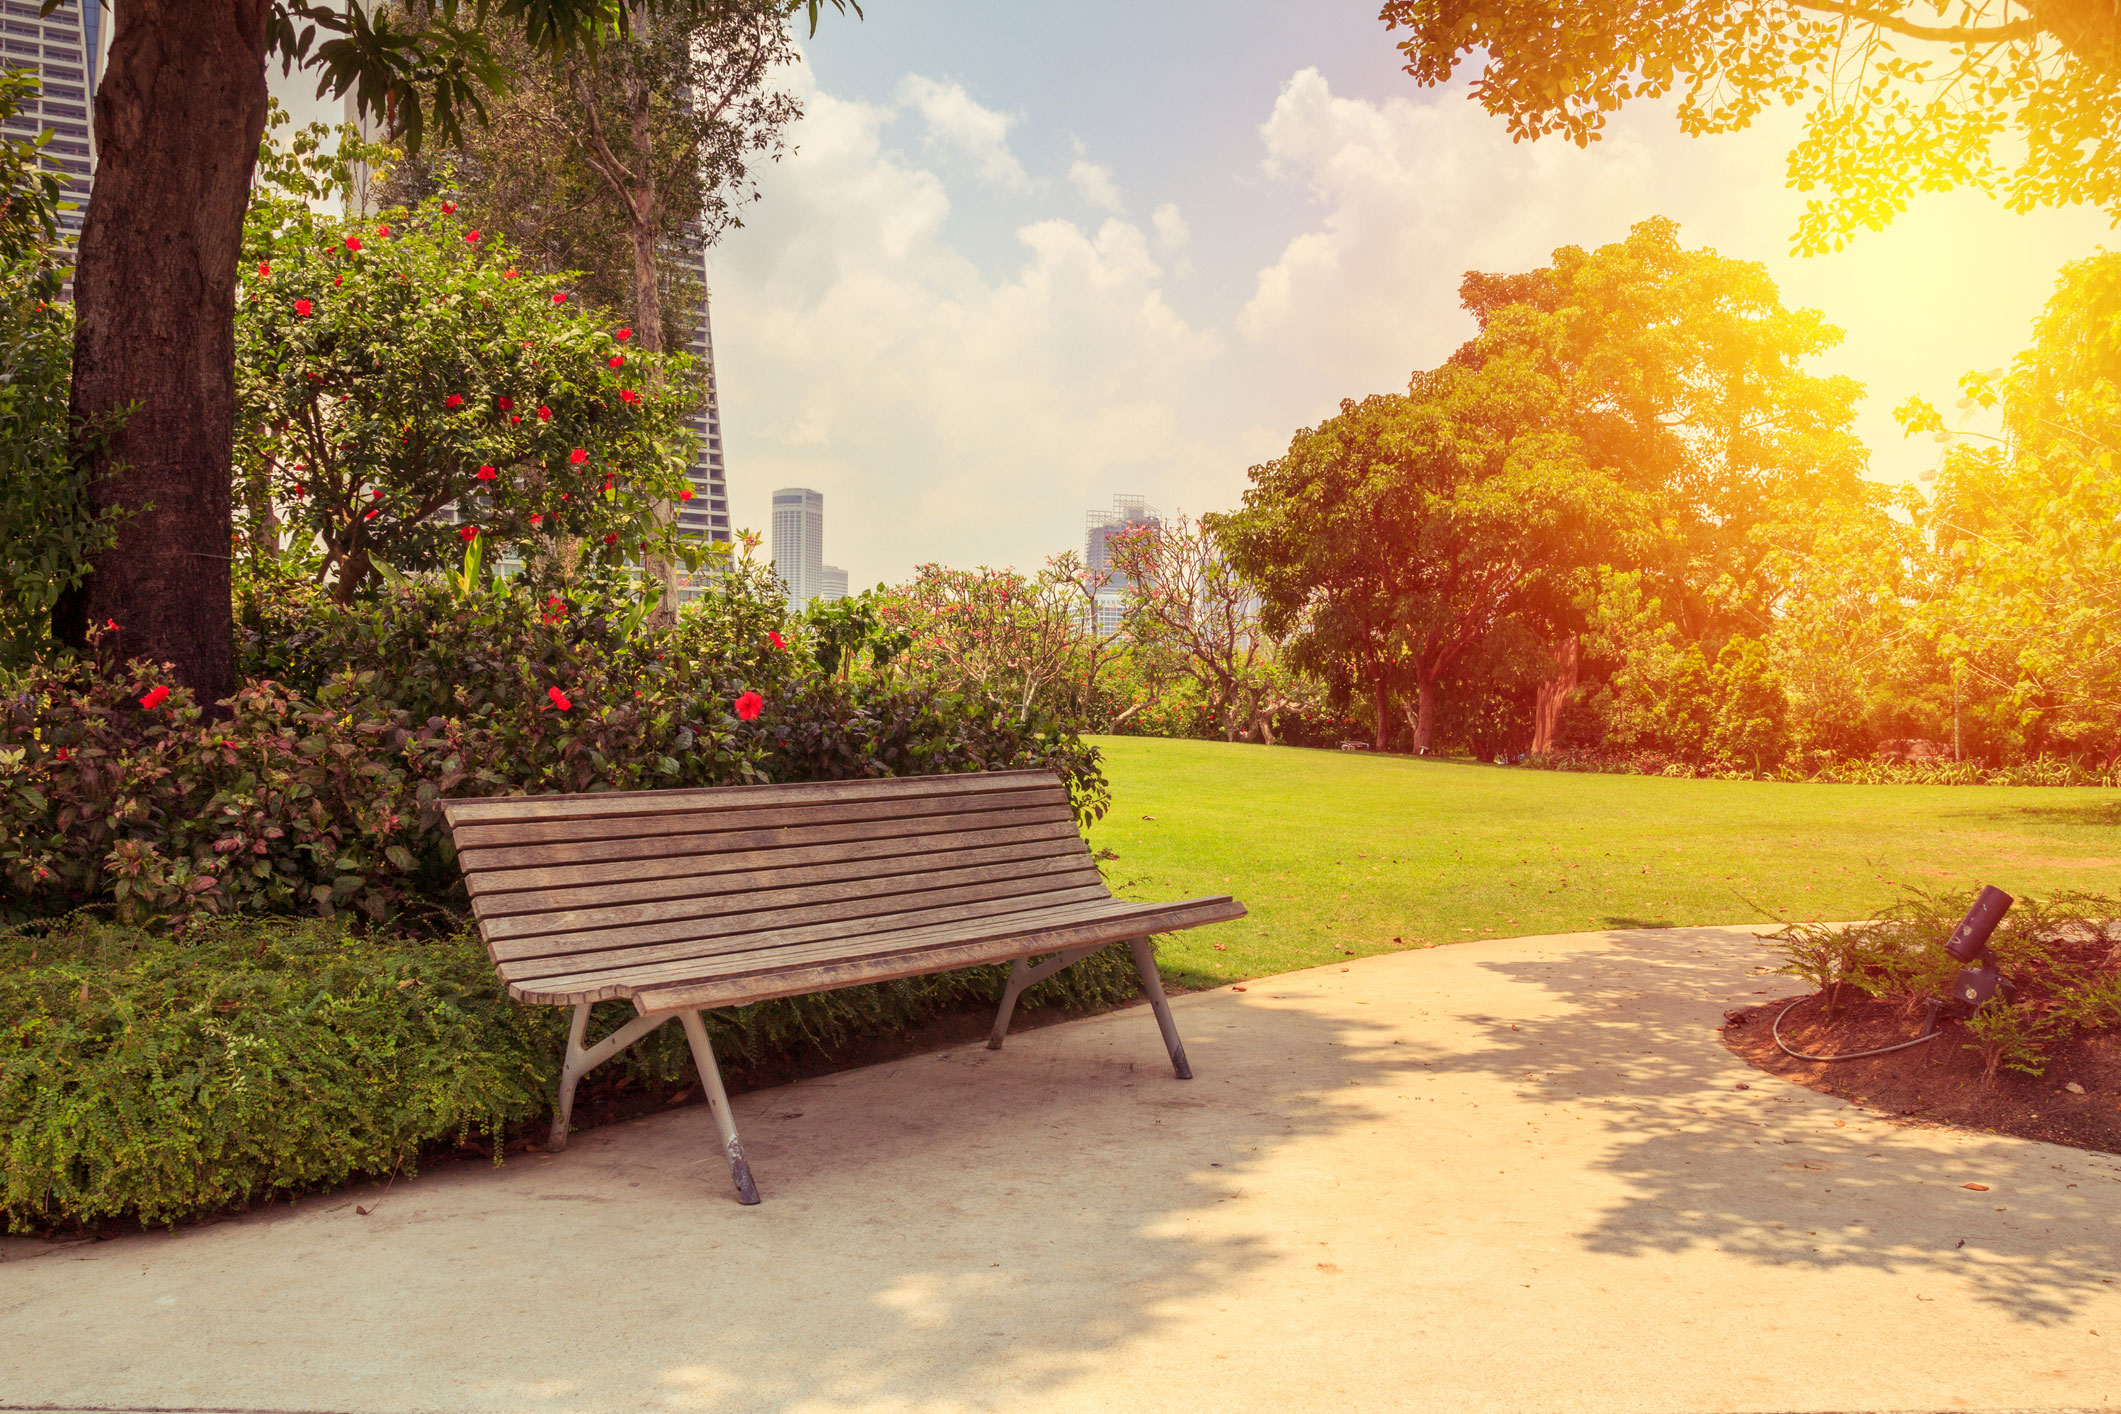 graphic illustration of a bench on a sidewalk next to trees and roses with a cityscape in the background